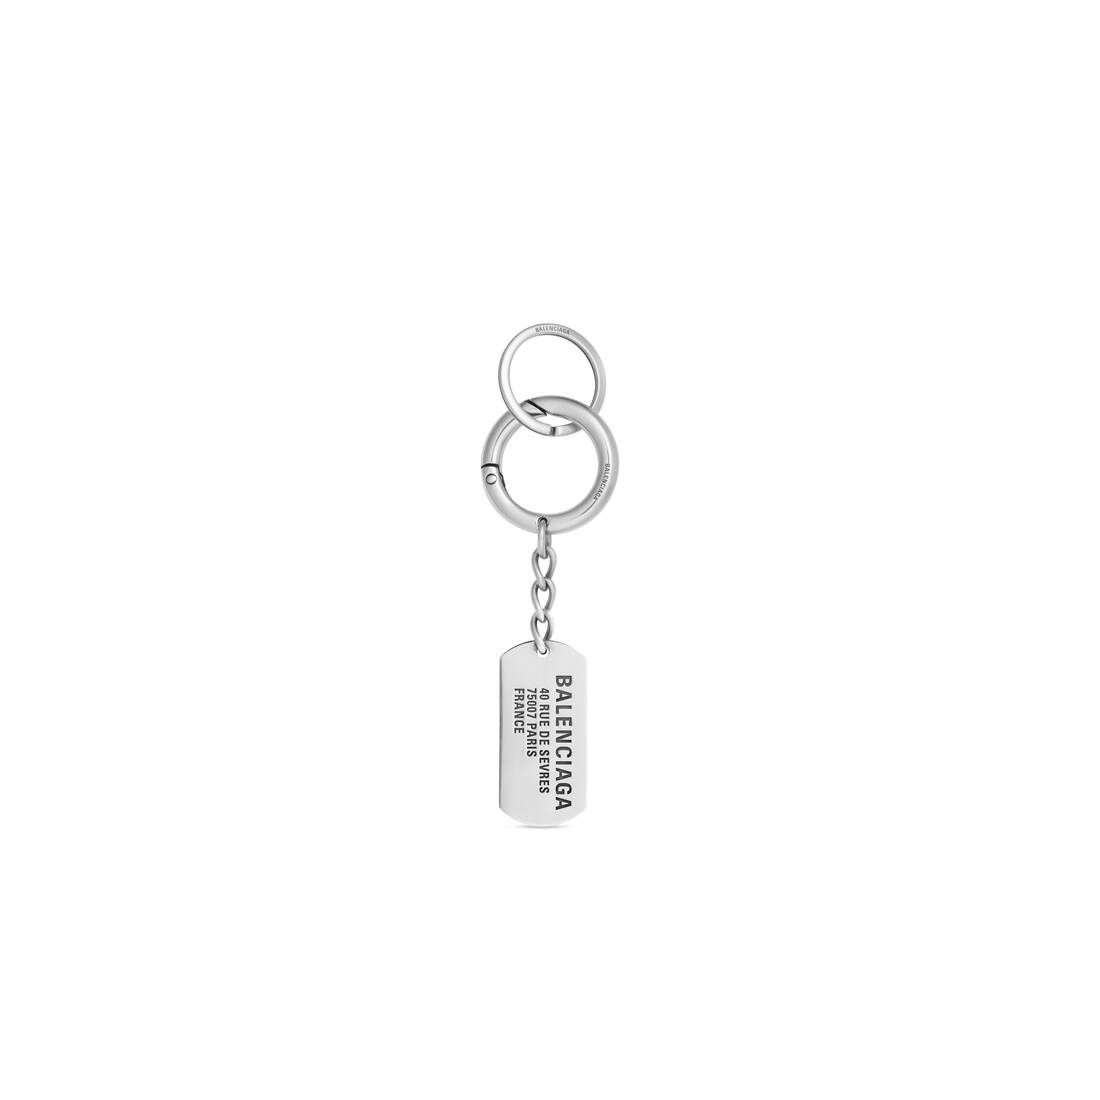 Tags Keychain in Antique Silver - 1